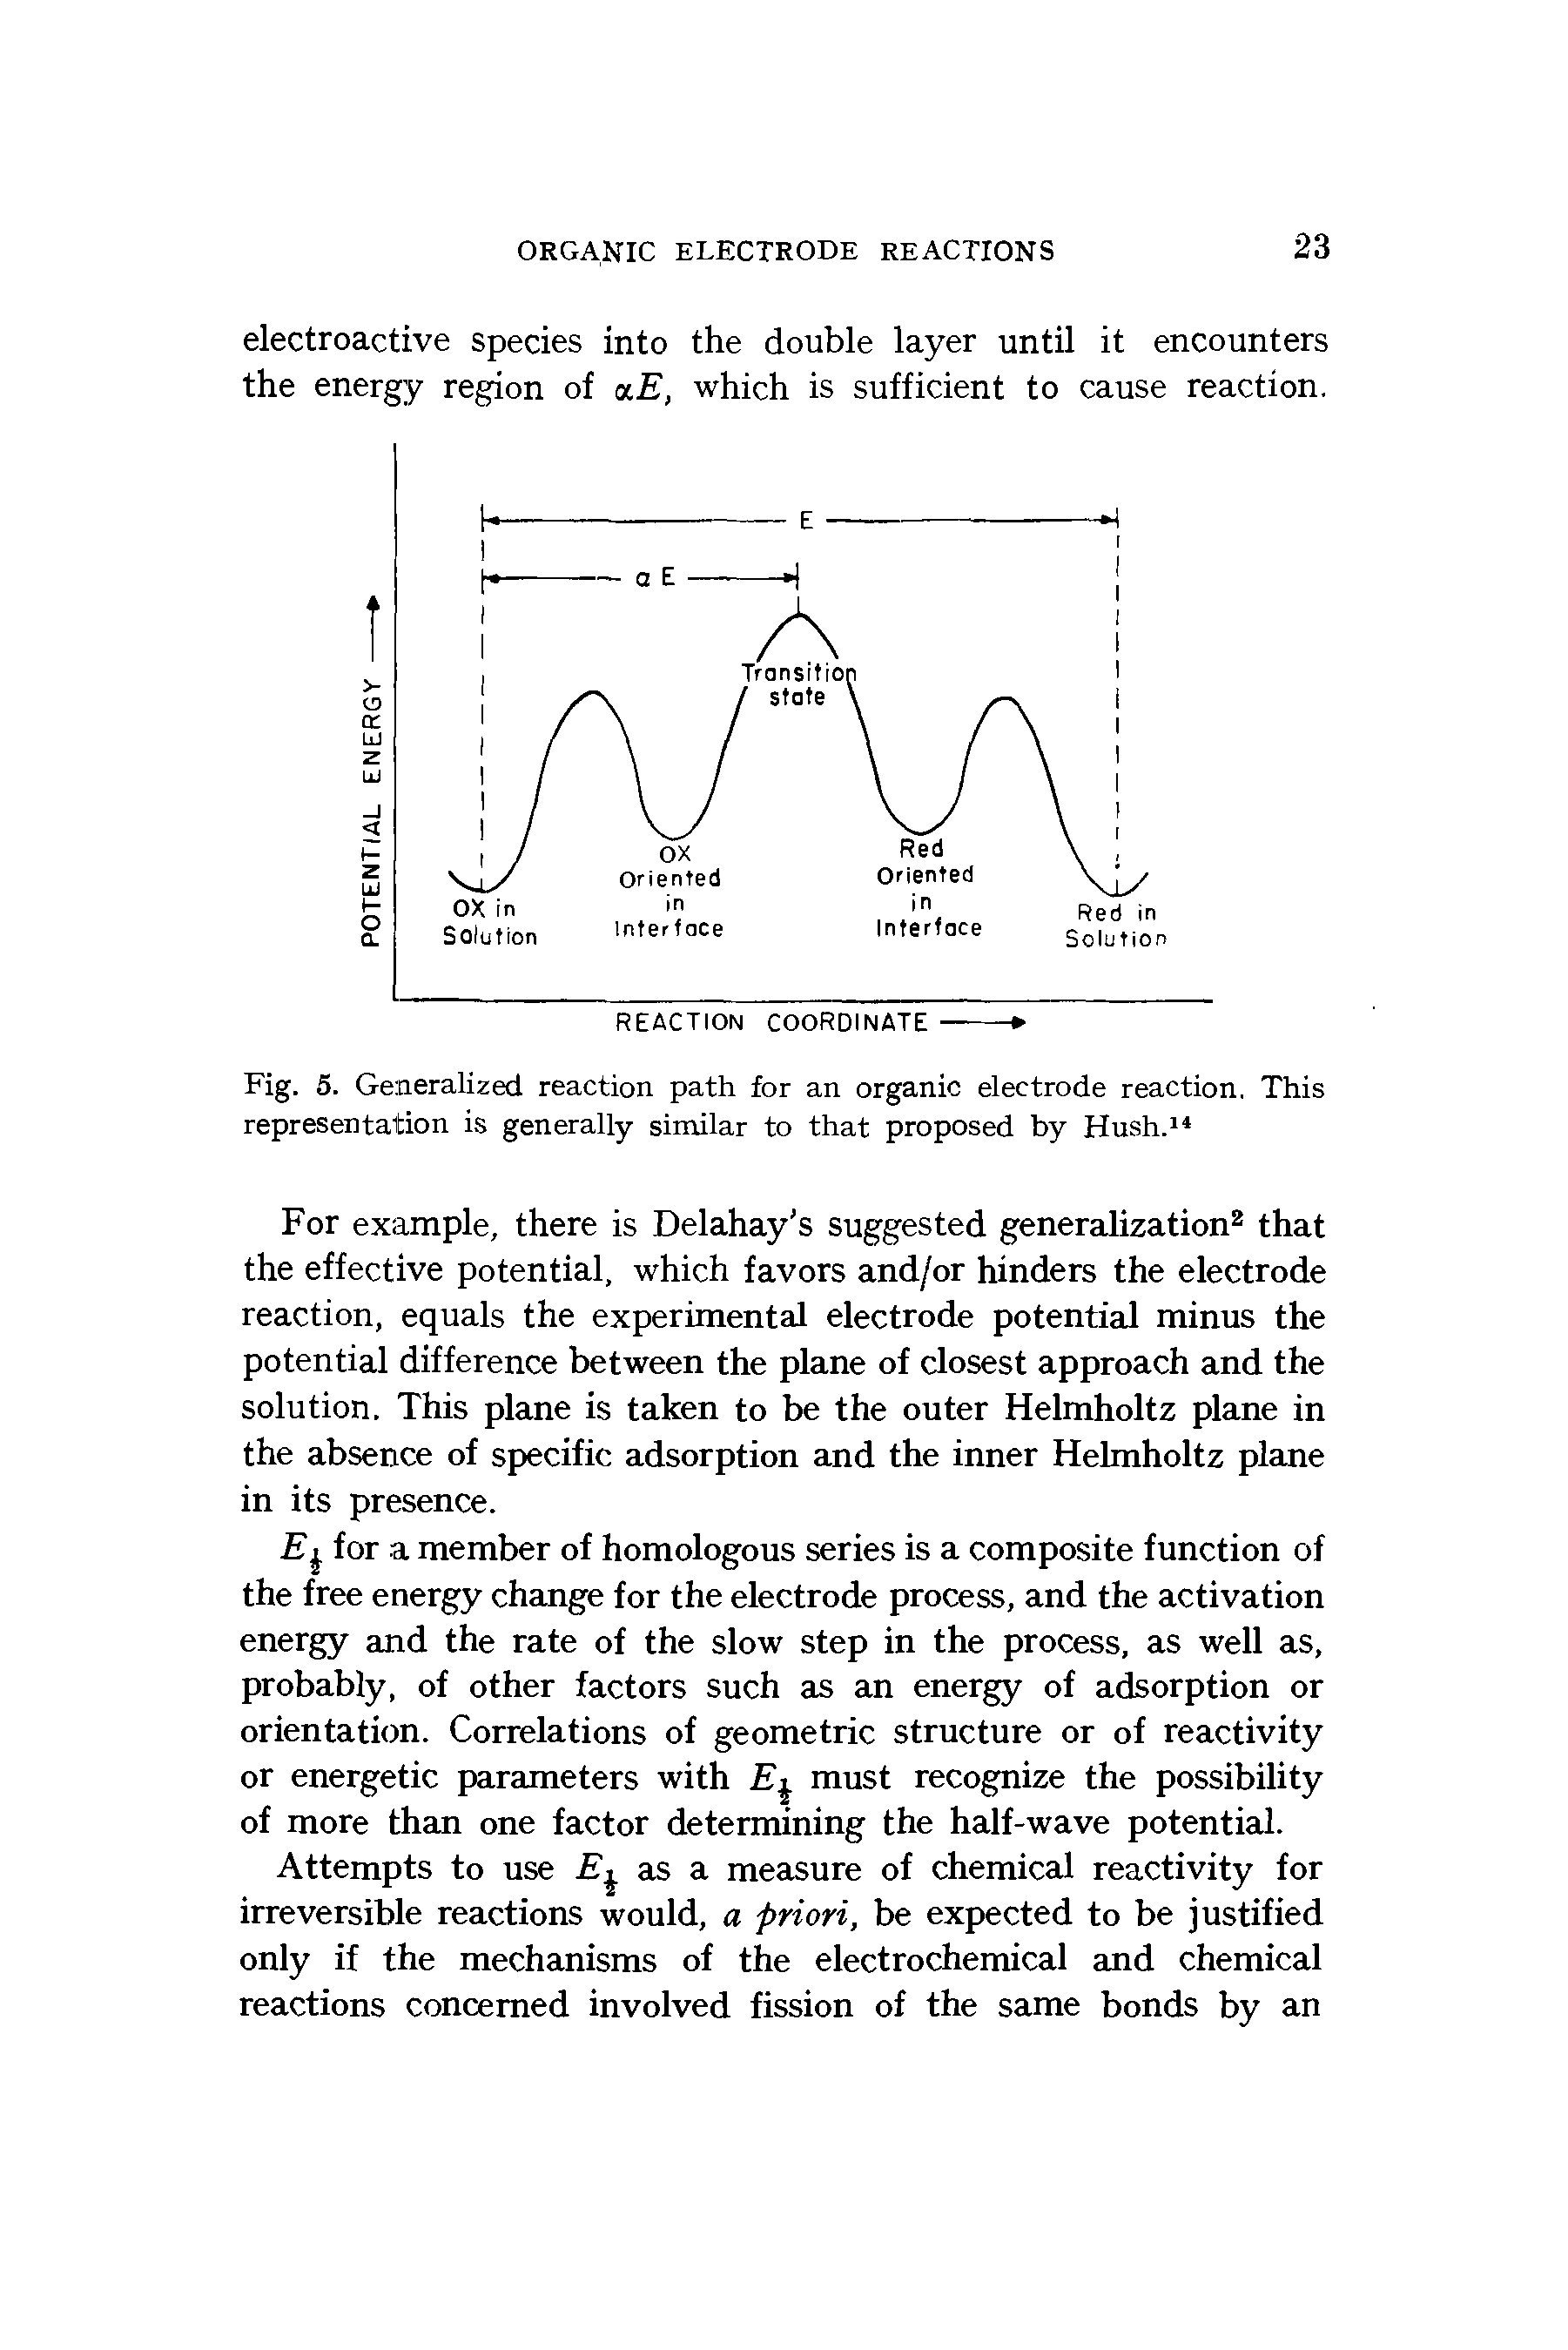 Fig. 5. Generalized reaction path for an organic electrode reaction. This representation is generally similar to that proposed by Hush. ...